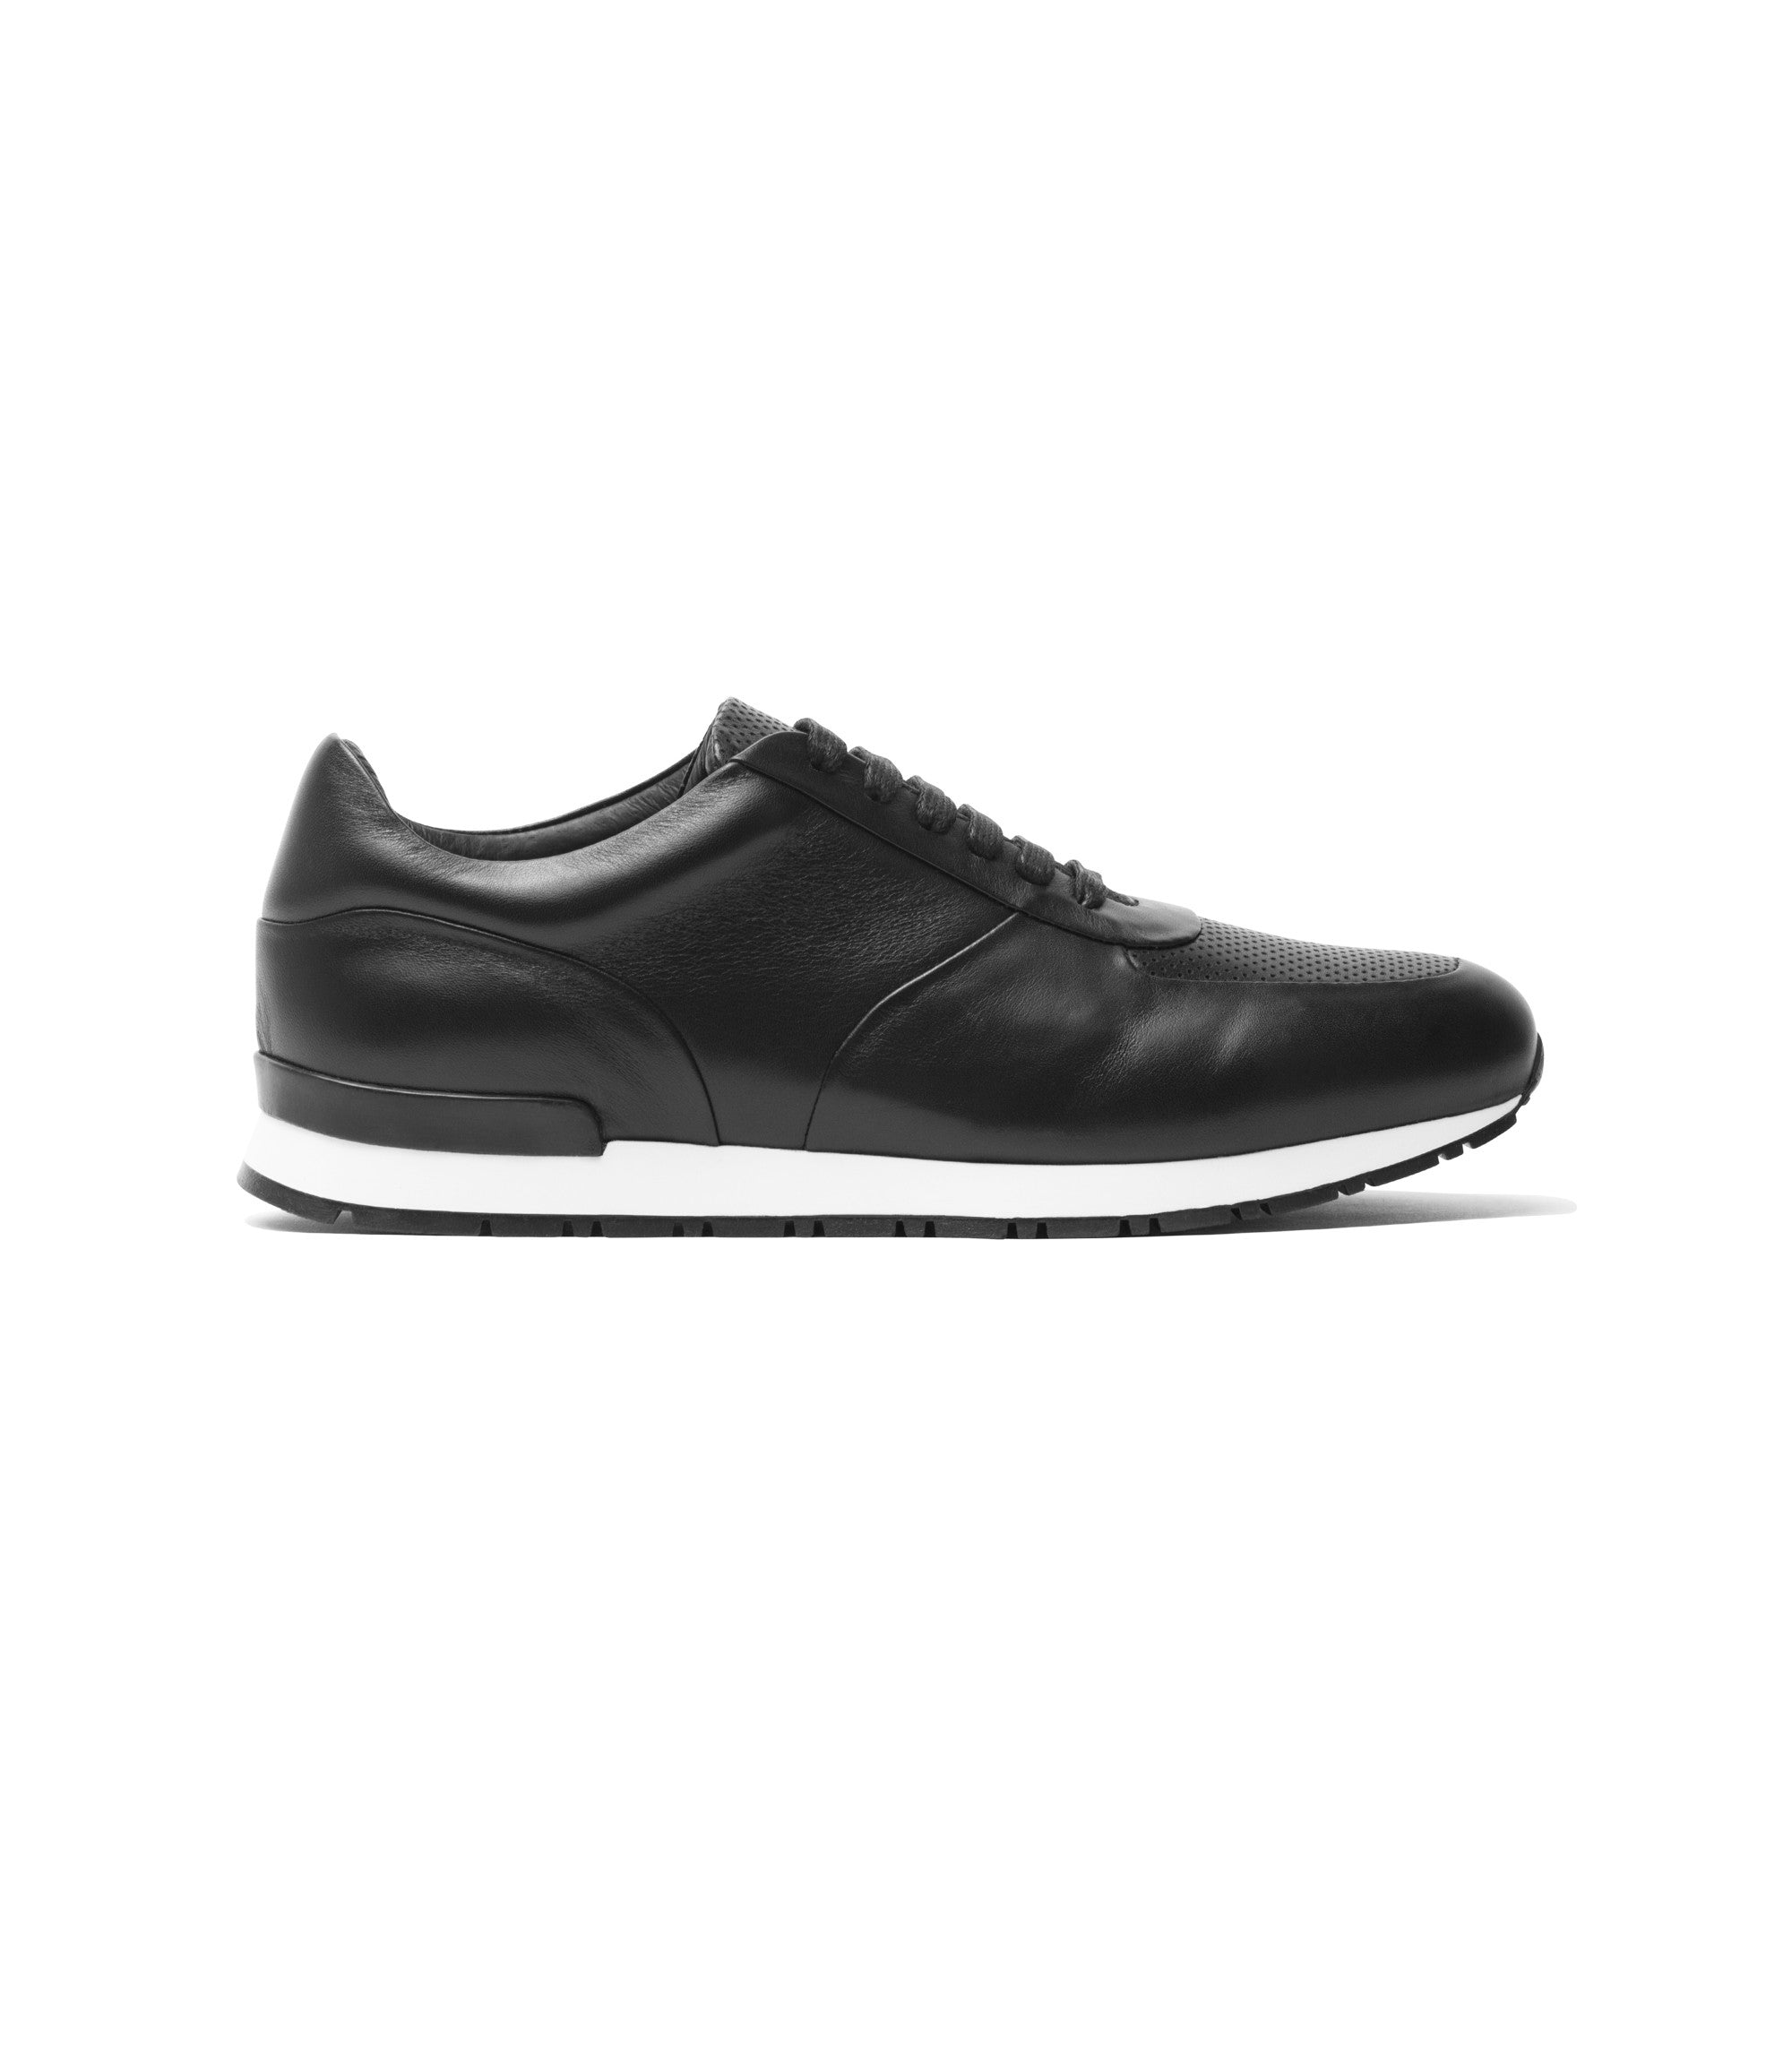 wings+horns leather trainer | wings+horns